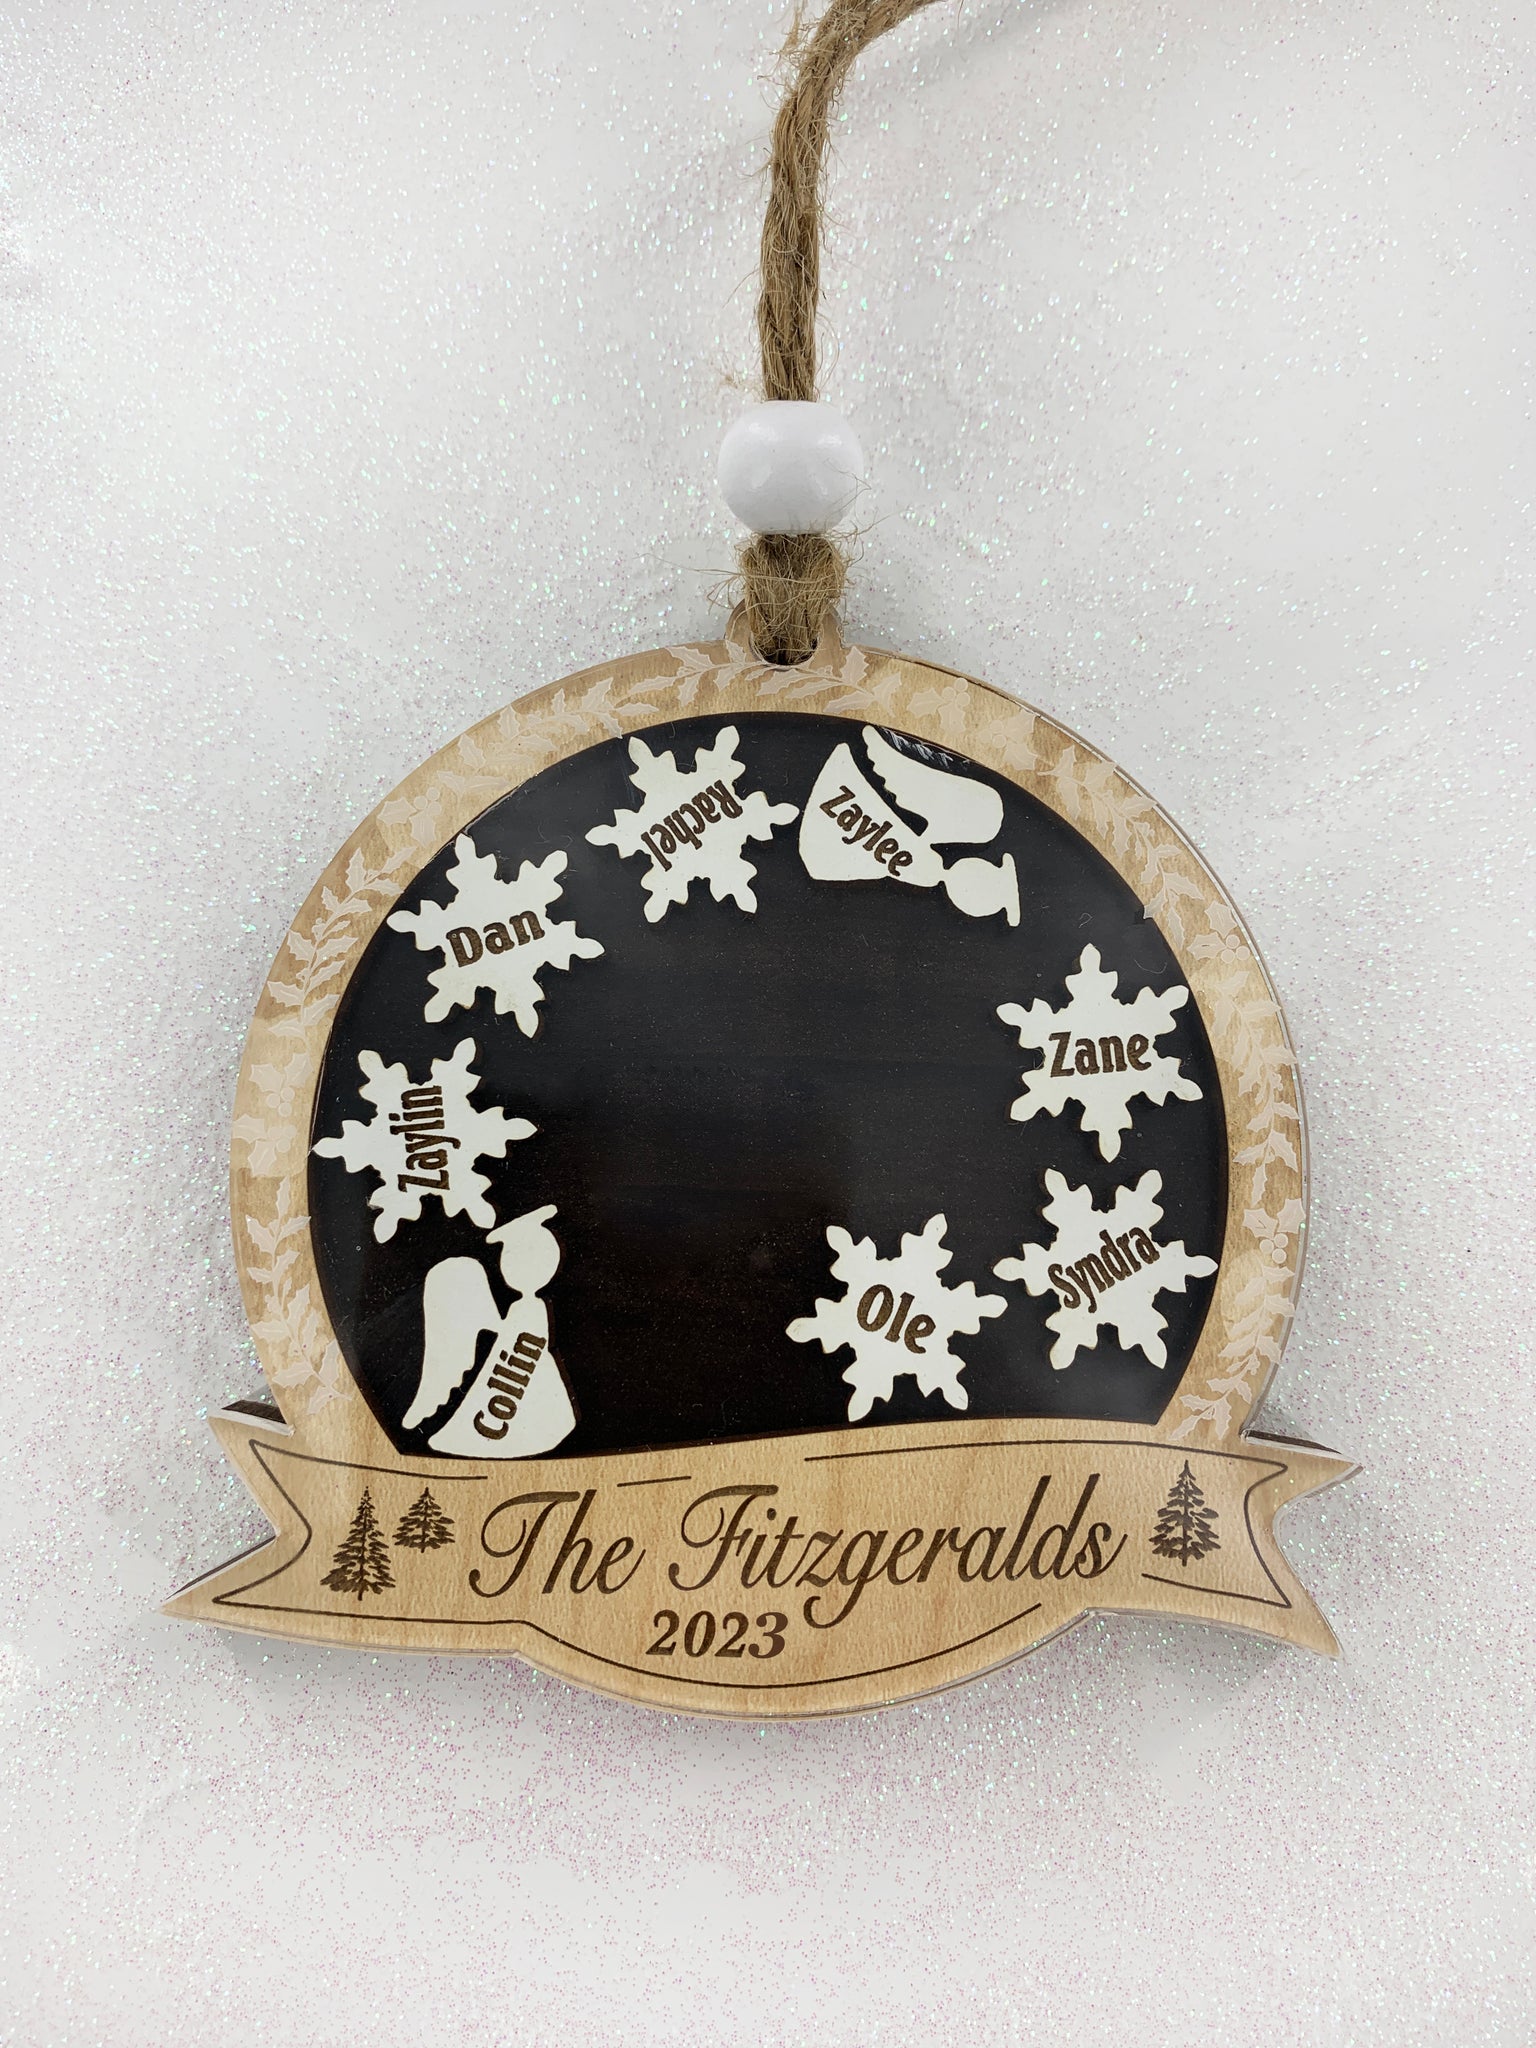 Grandchildren Gift Personalized Ornament 2022 Christmas Tree Gifts –  Weathered Raindrop